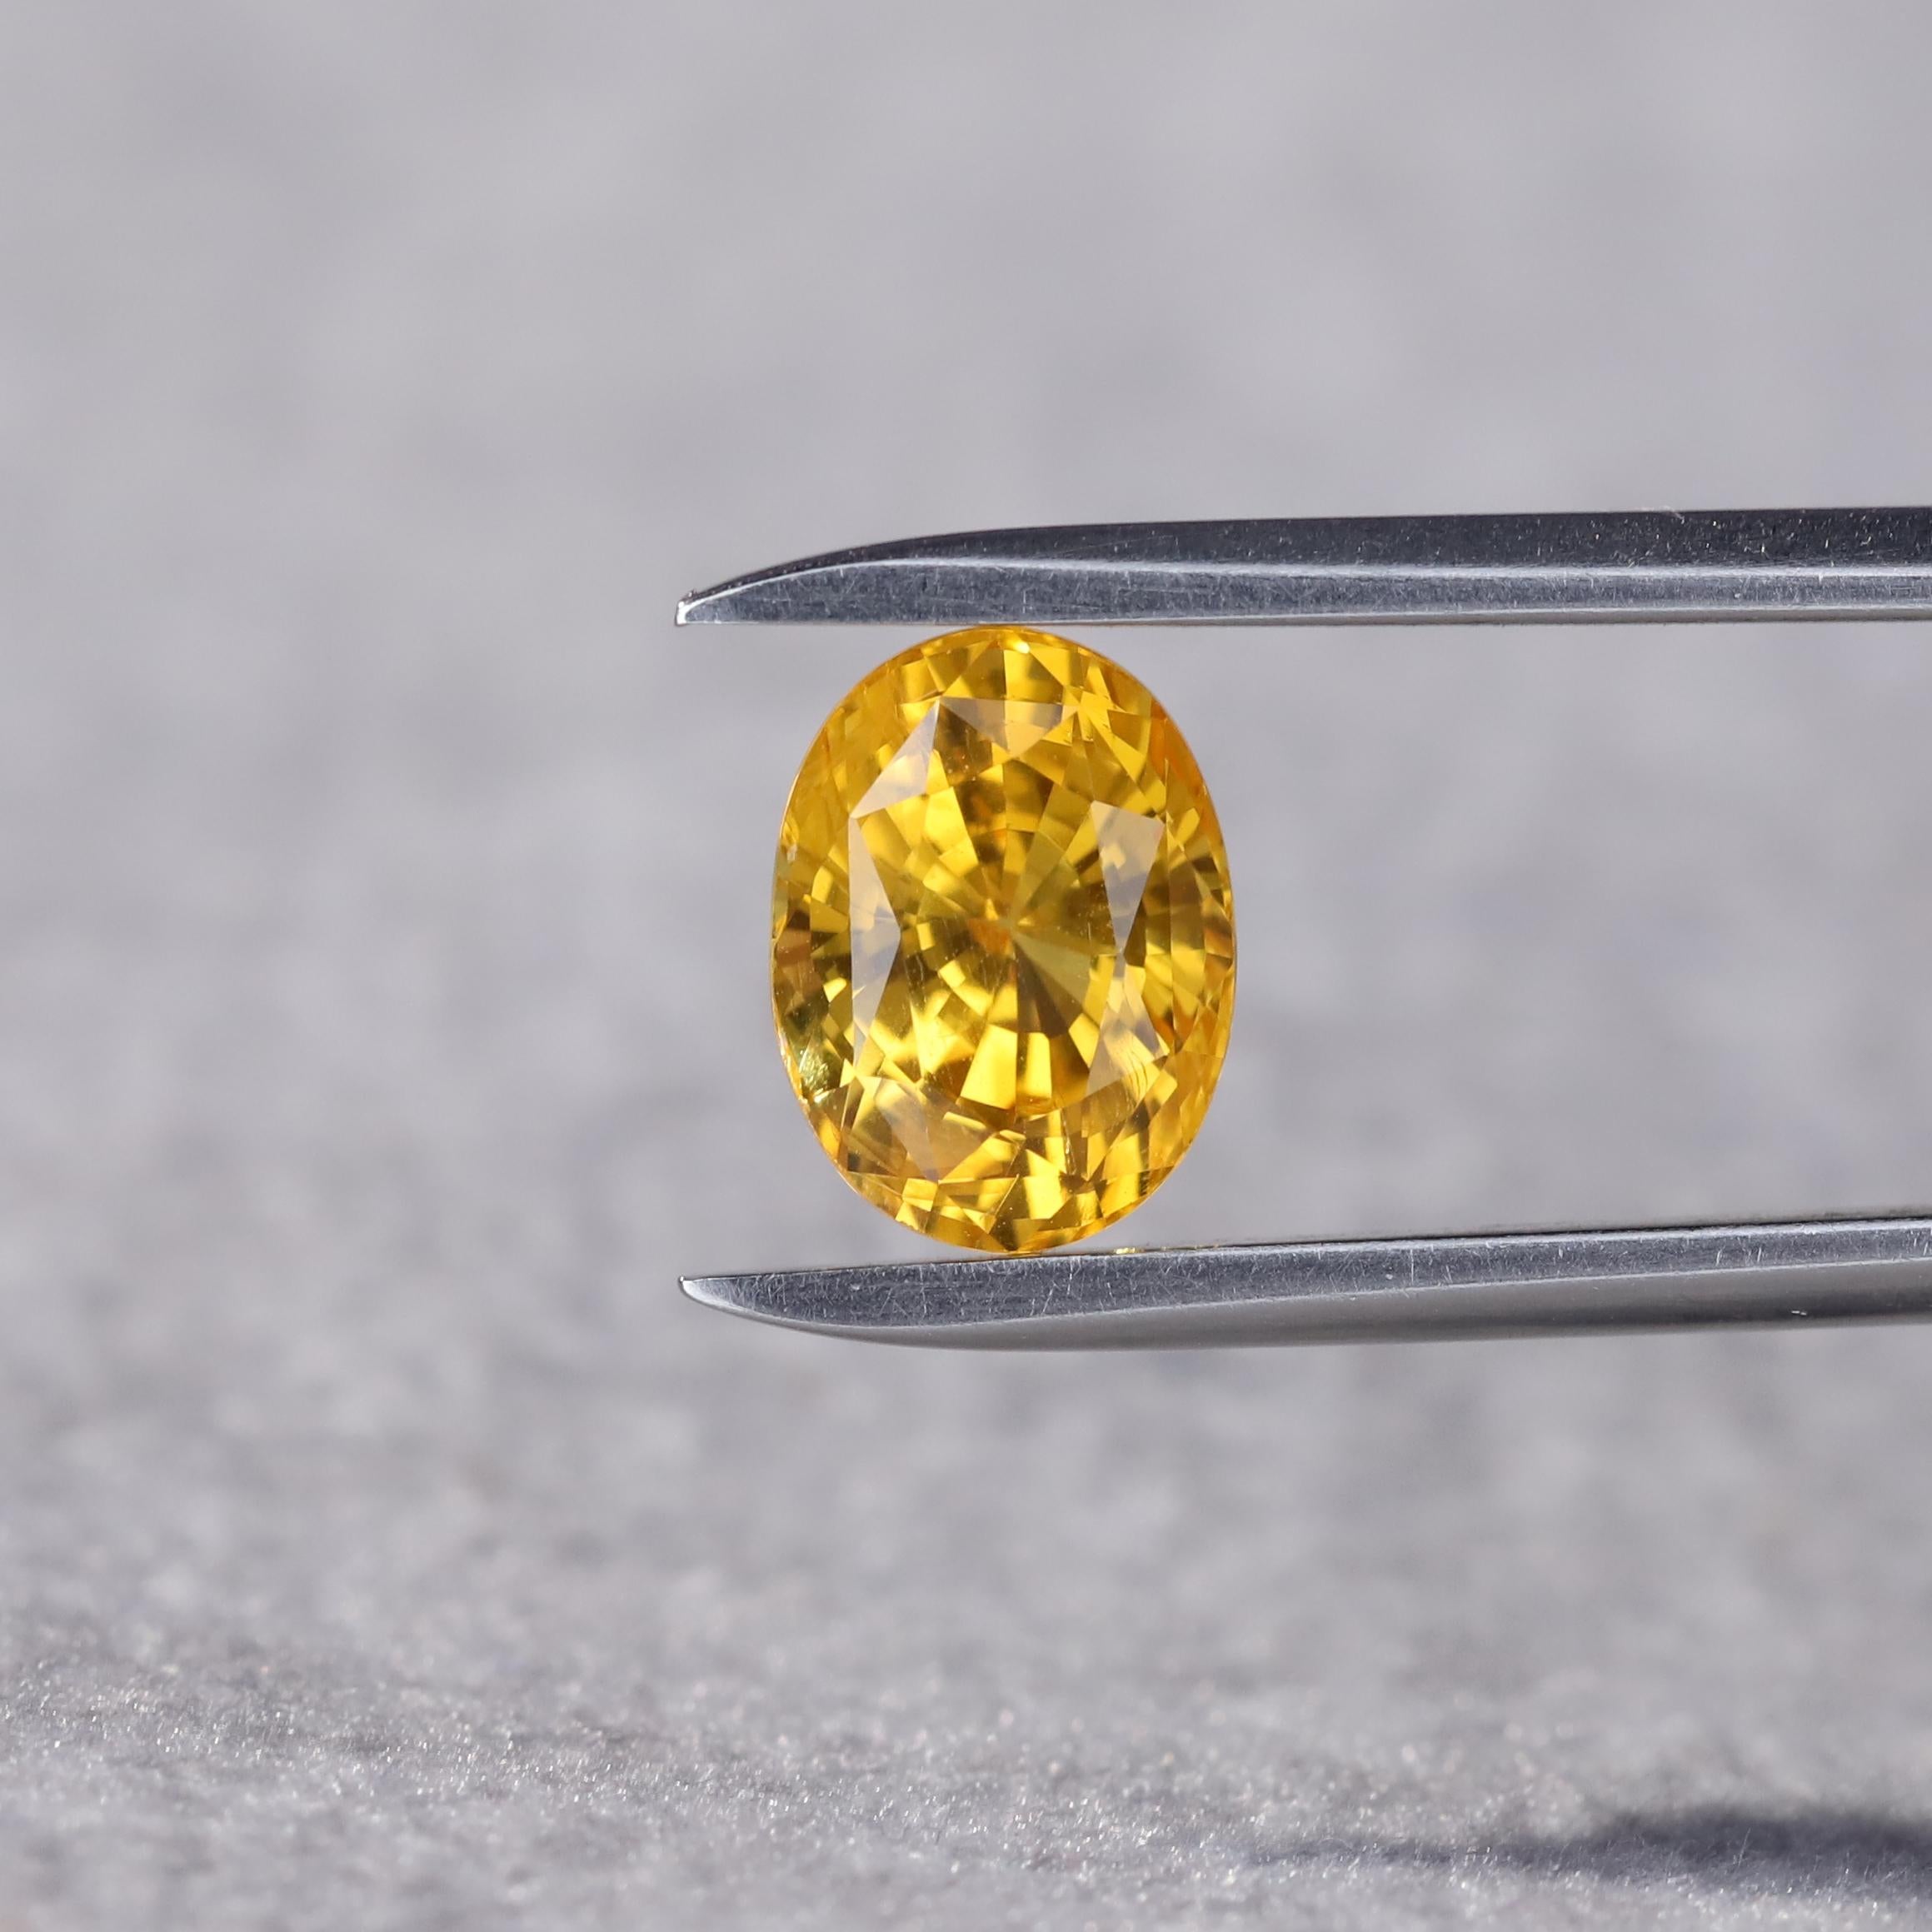 2.25 Carat Oval Cut Natural Golden Yellow Sapphire Loose Gemstone from Sri Lanka For Sale 1